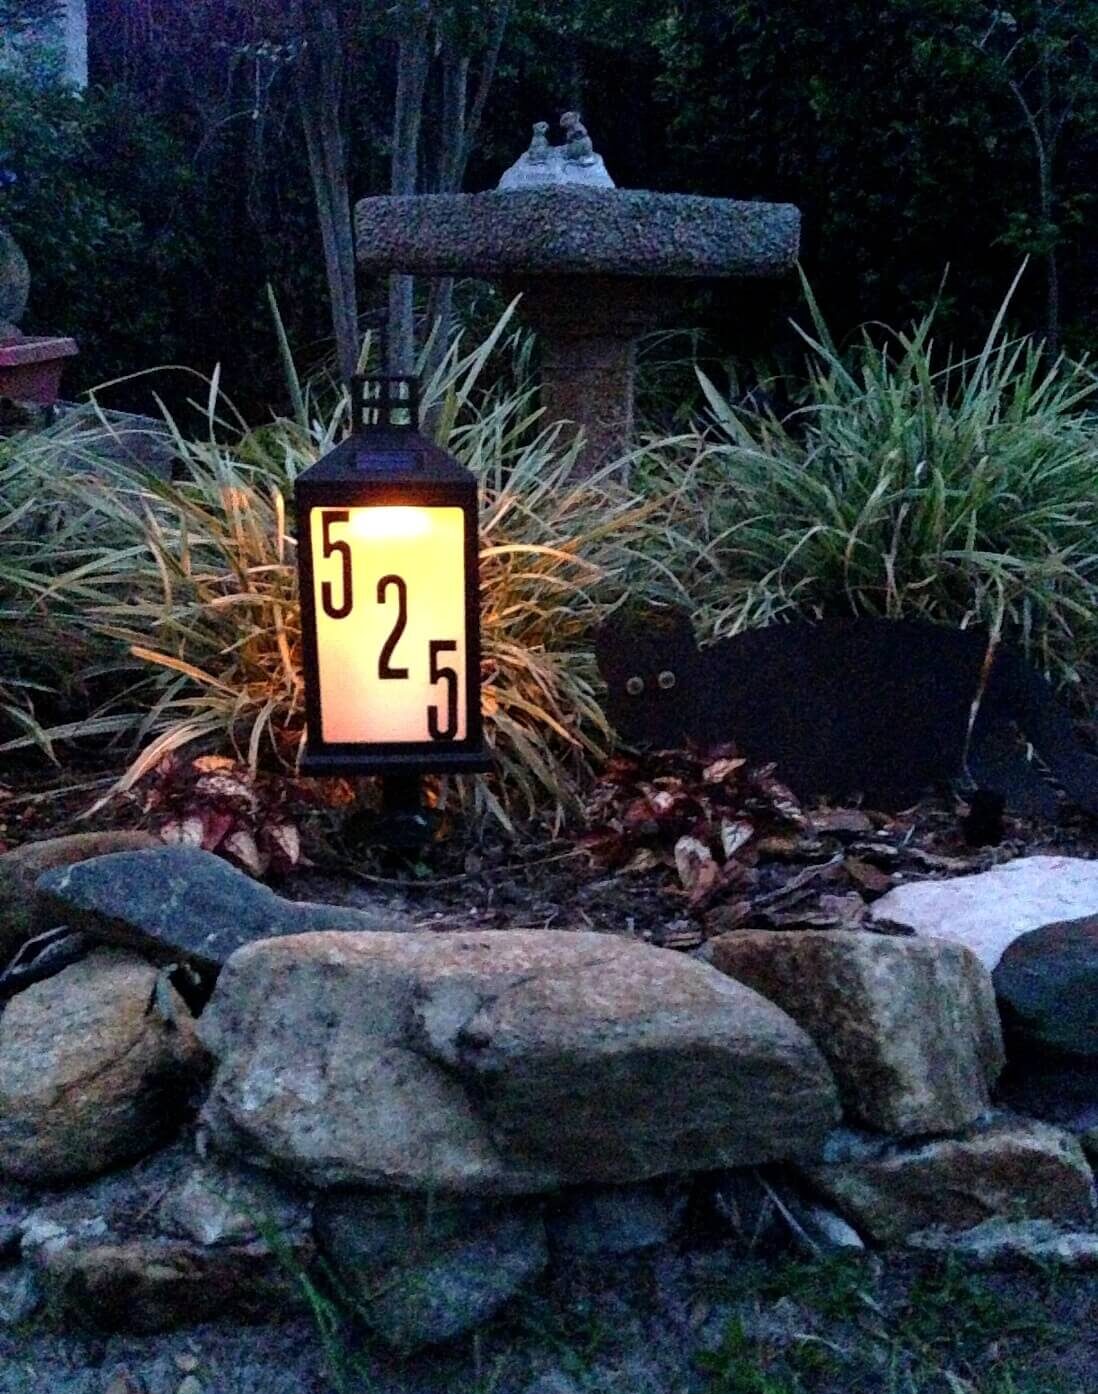 lantern house number sign in gardens on rocks lit up a night